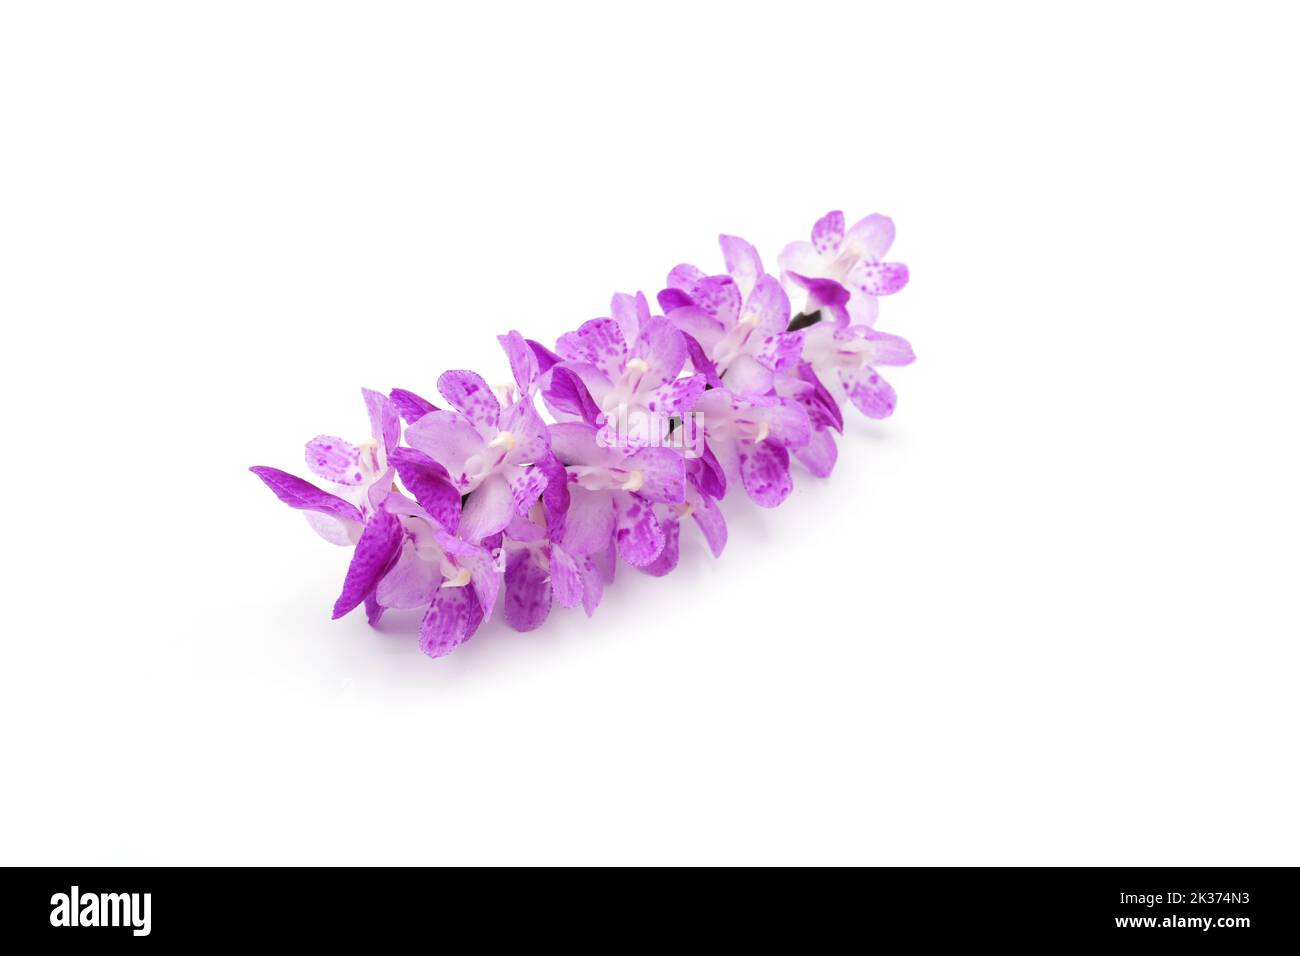 The close-up view of a purple Chinese wisteria plant flower detail isolated on the white background Stock Photo